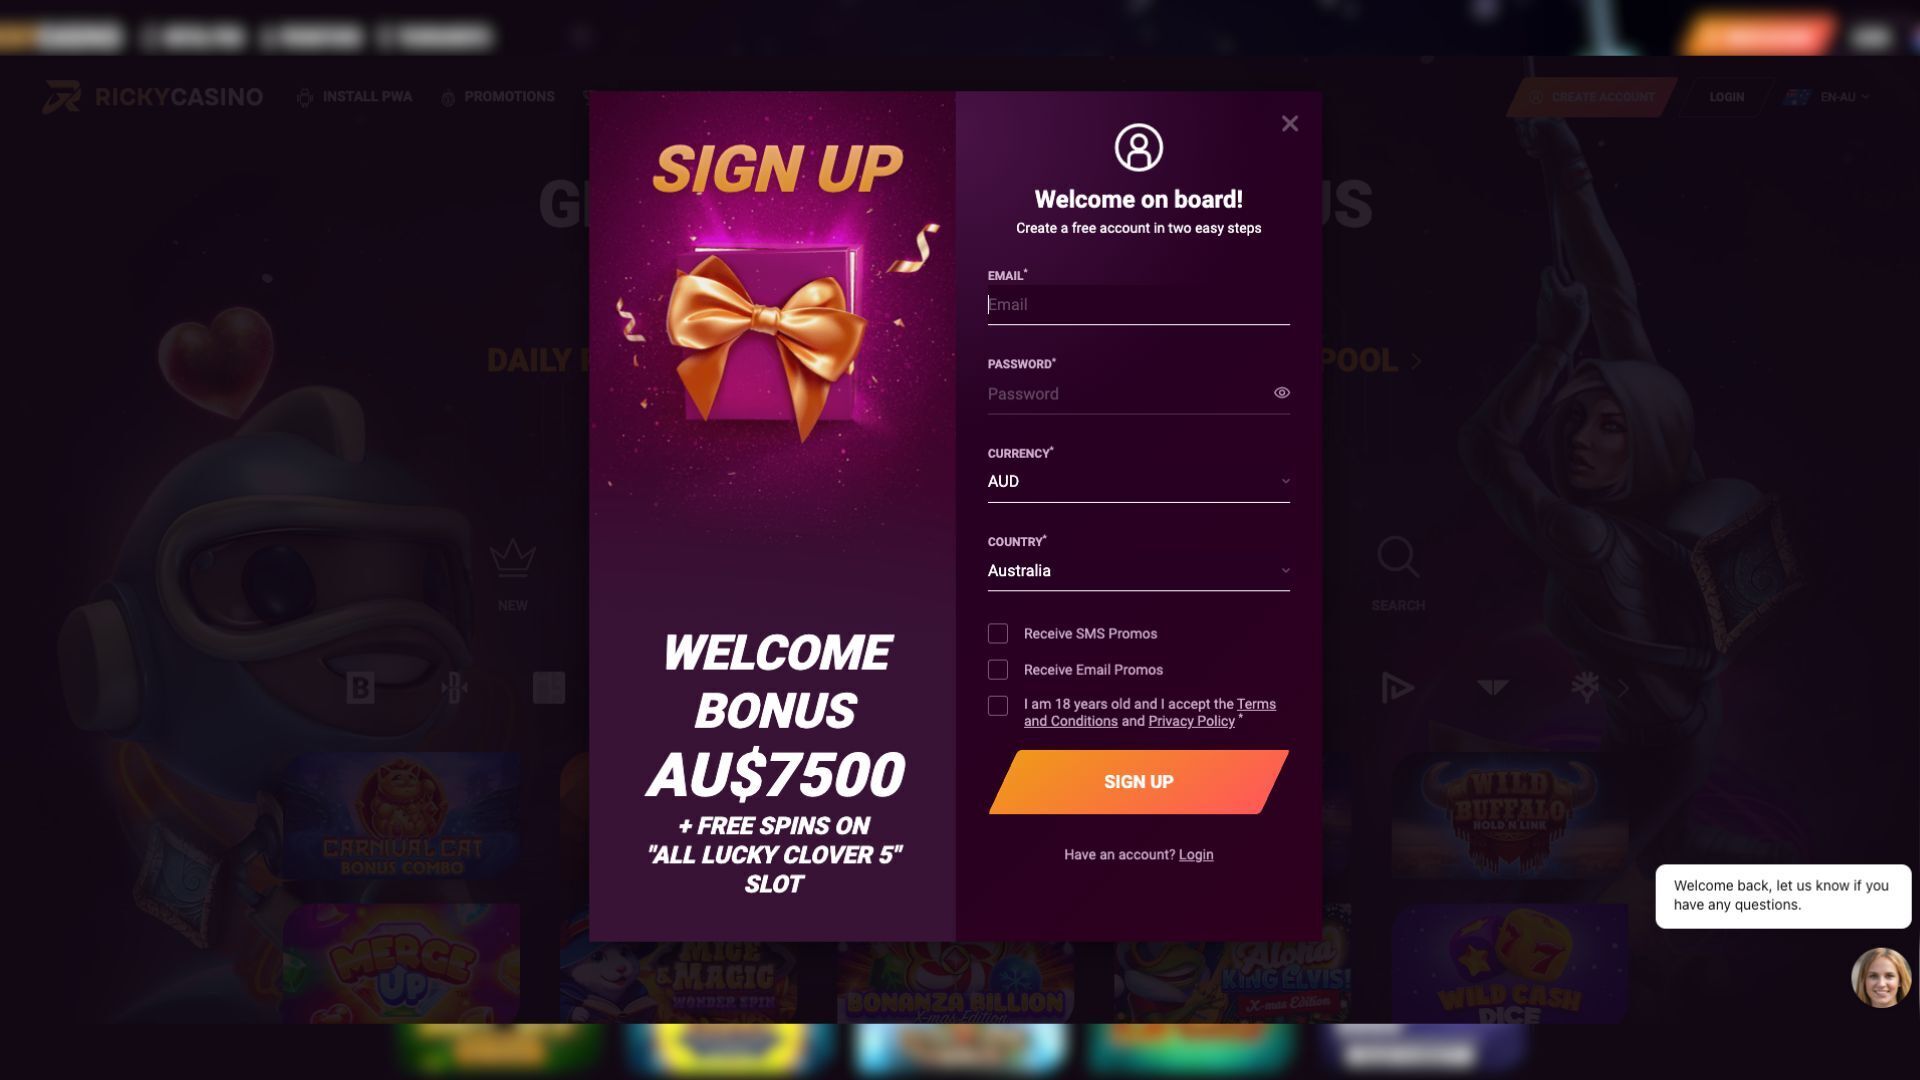 This is a screenshot of the Signup process at Ricky Casino in Australia